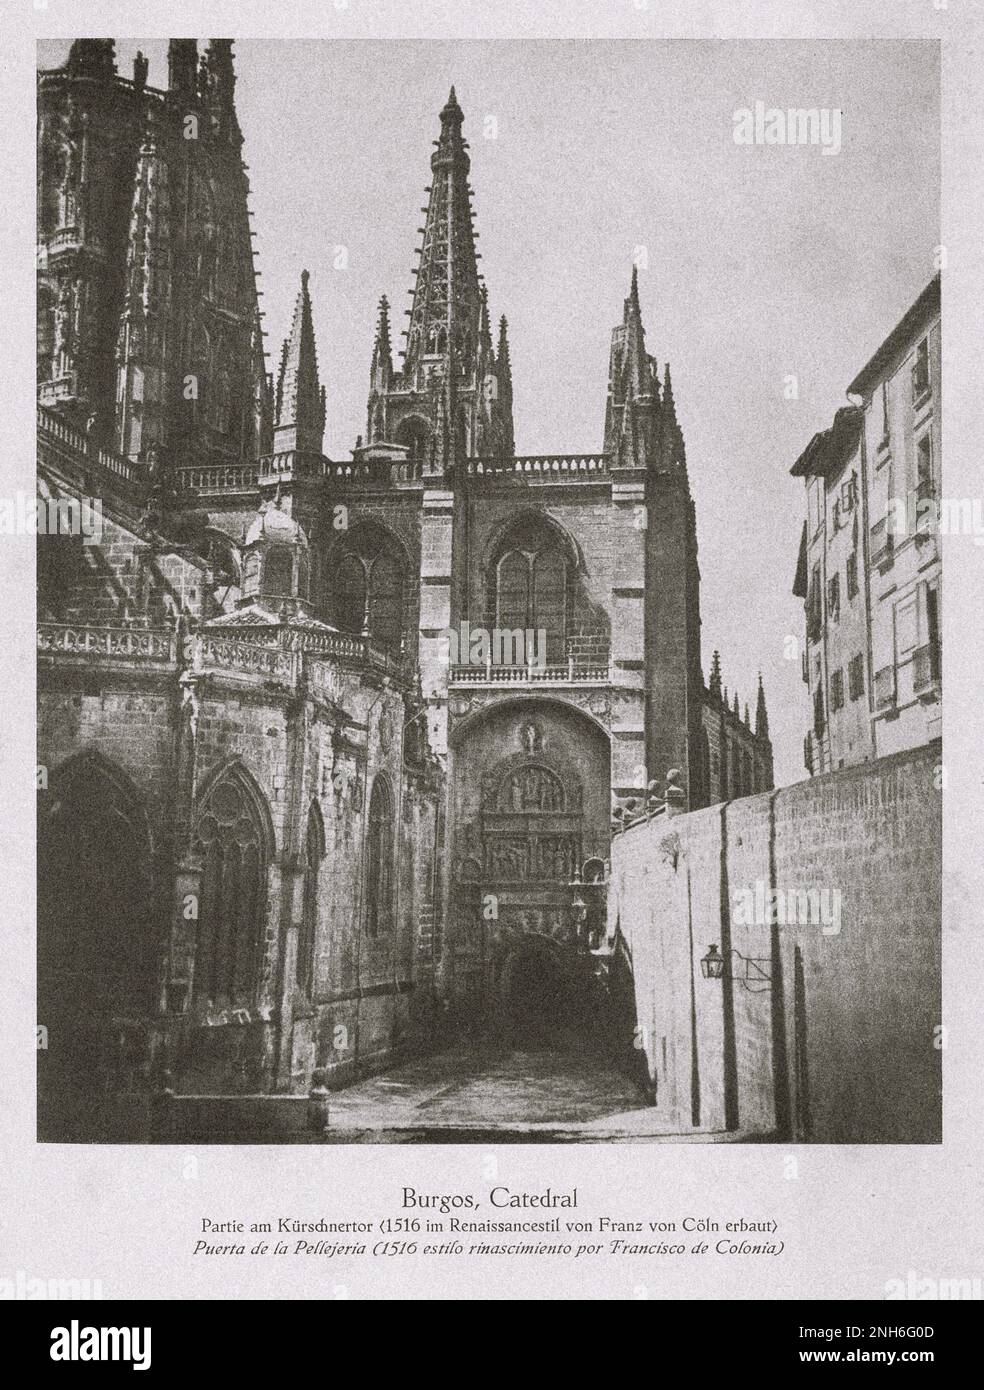 Architecture of Old Spain. Vintage photo of Burgos Cathedral.  Pellejería gate which was built in 1516 by Francisco de Colonía in the Renaissance style Stock Photo